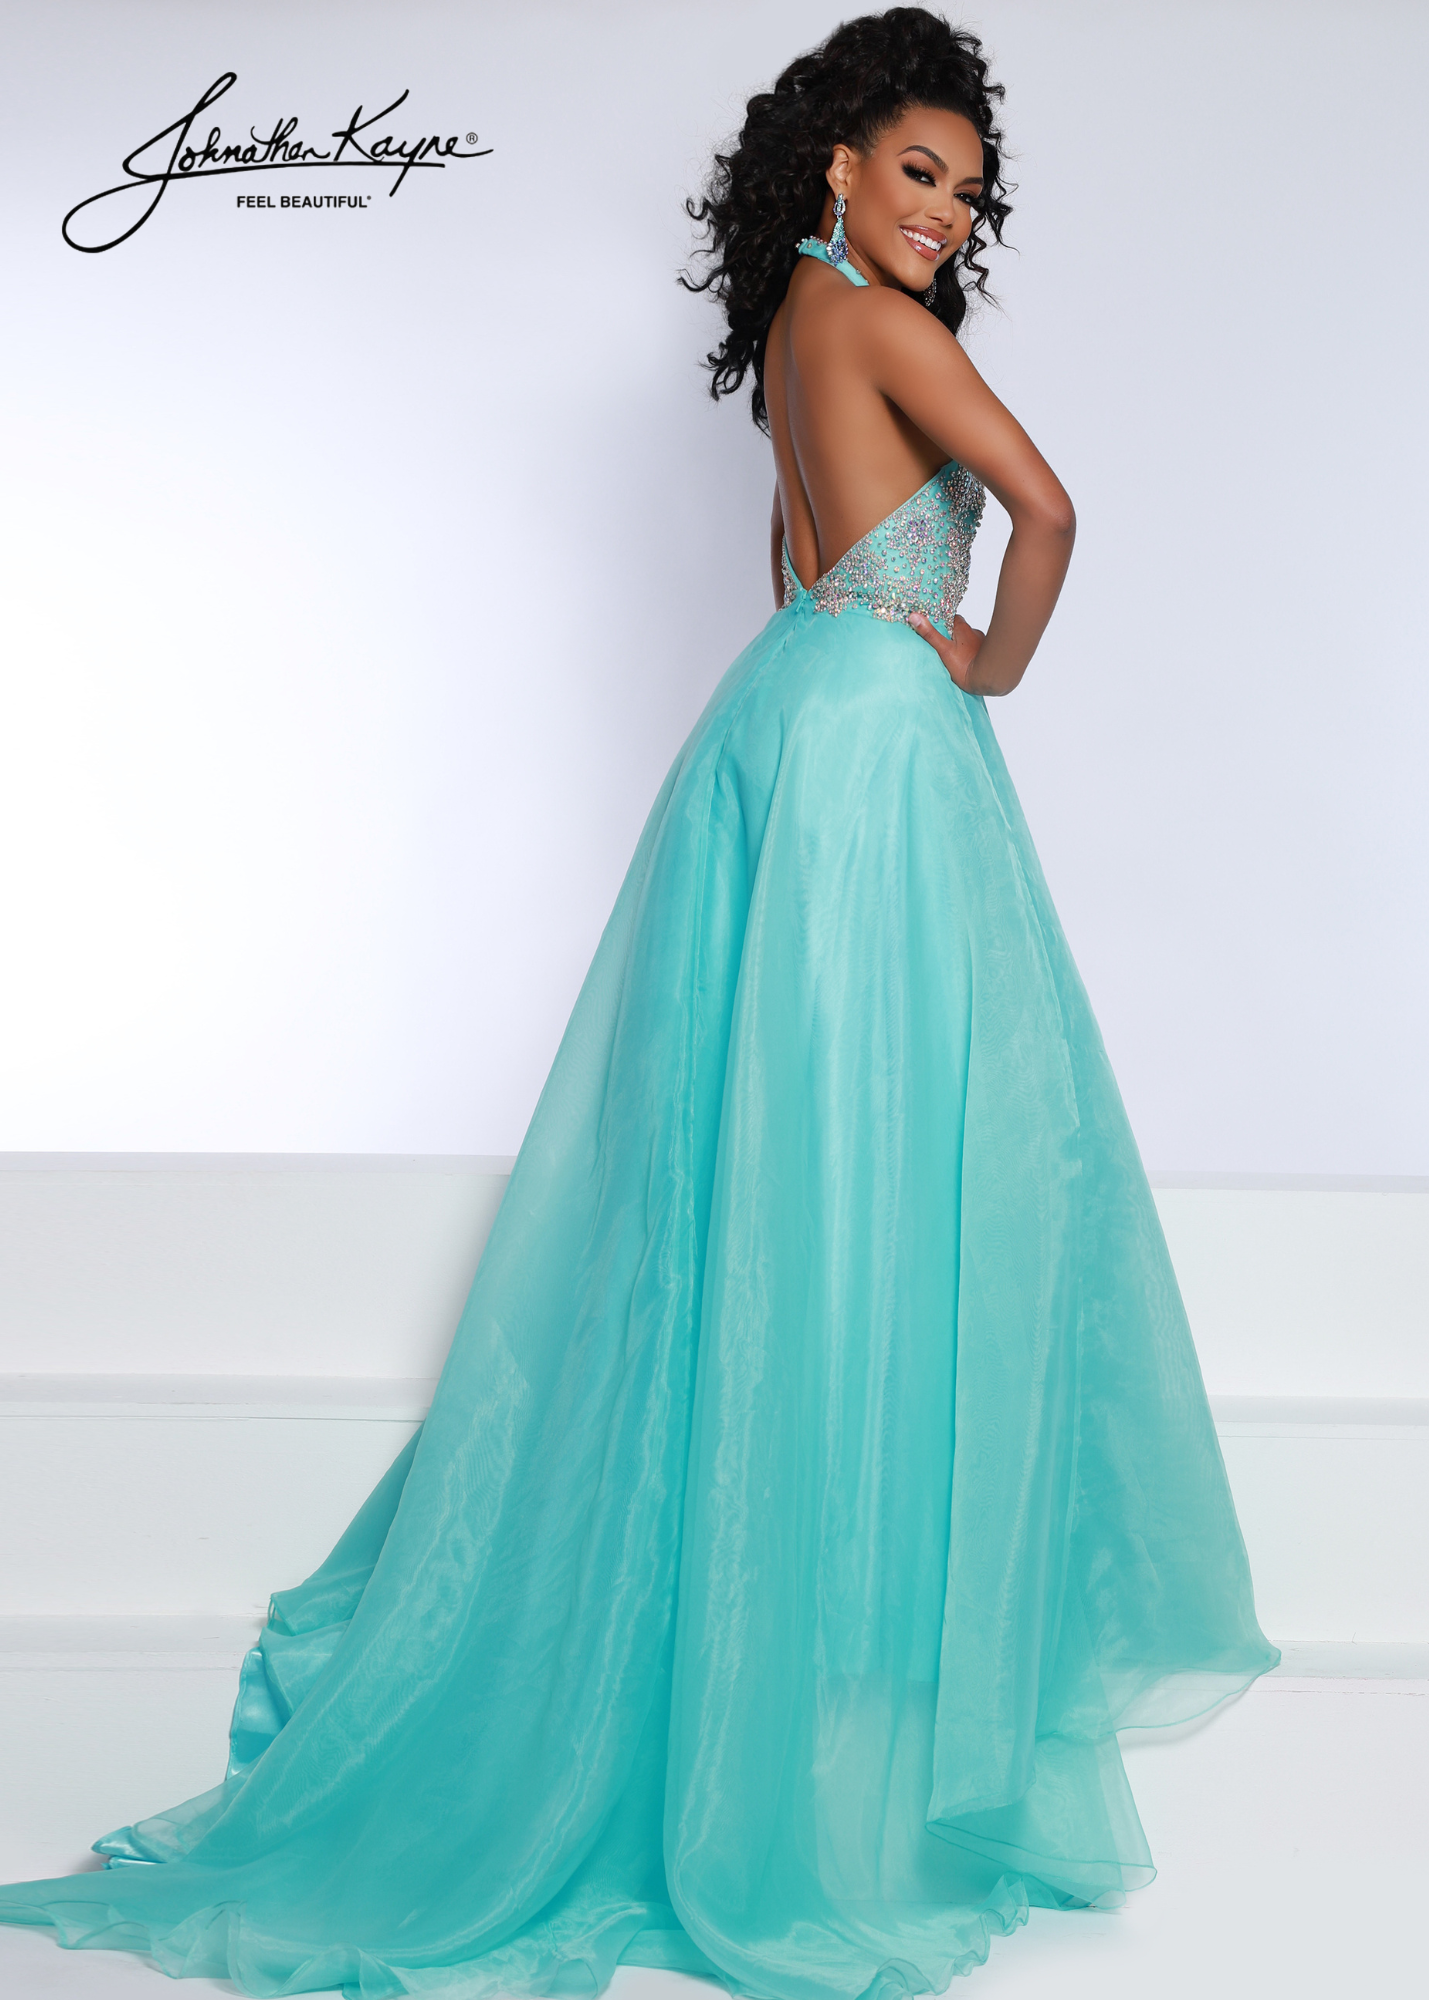 Johnathan Kayne 2676 A Line Halter Maxi Slit Prom Dress Backless Pageant Gown Crystal Grace the stage in this divine A-line! This organza gown features a hand beaded halter bodice with a deep plunge for a touch of modern sophistication.